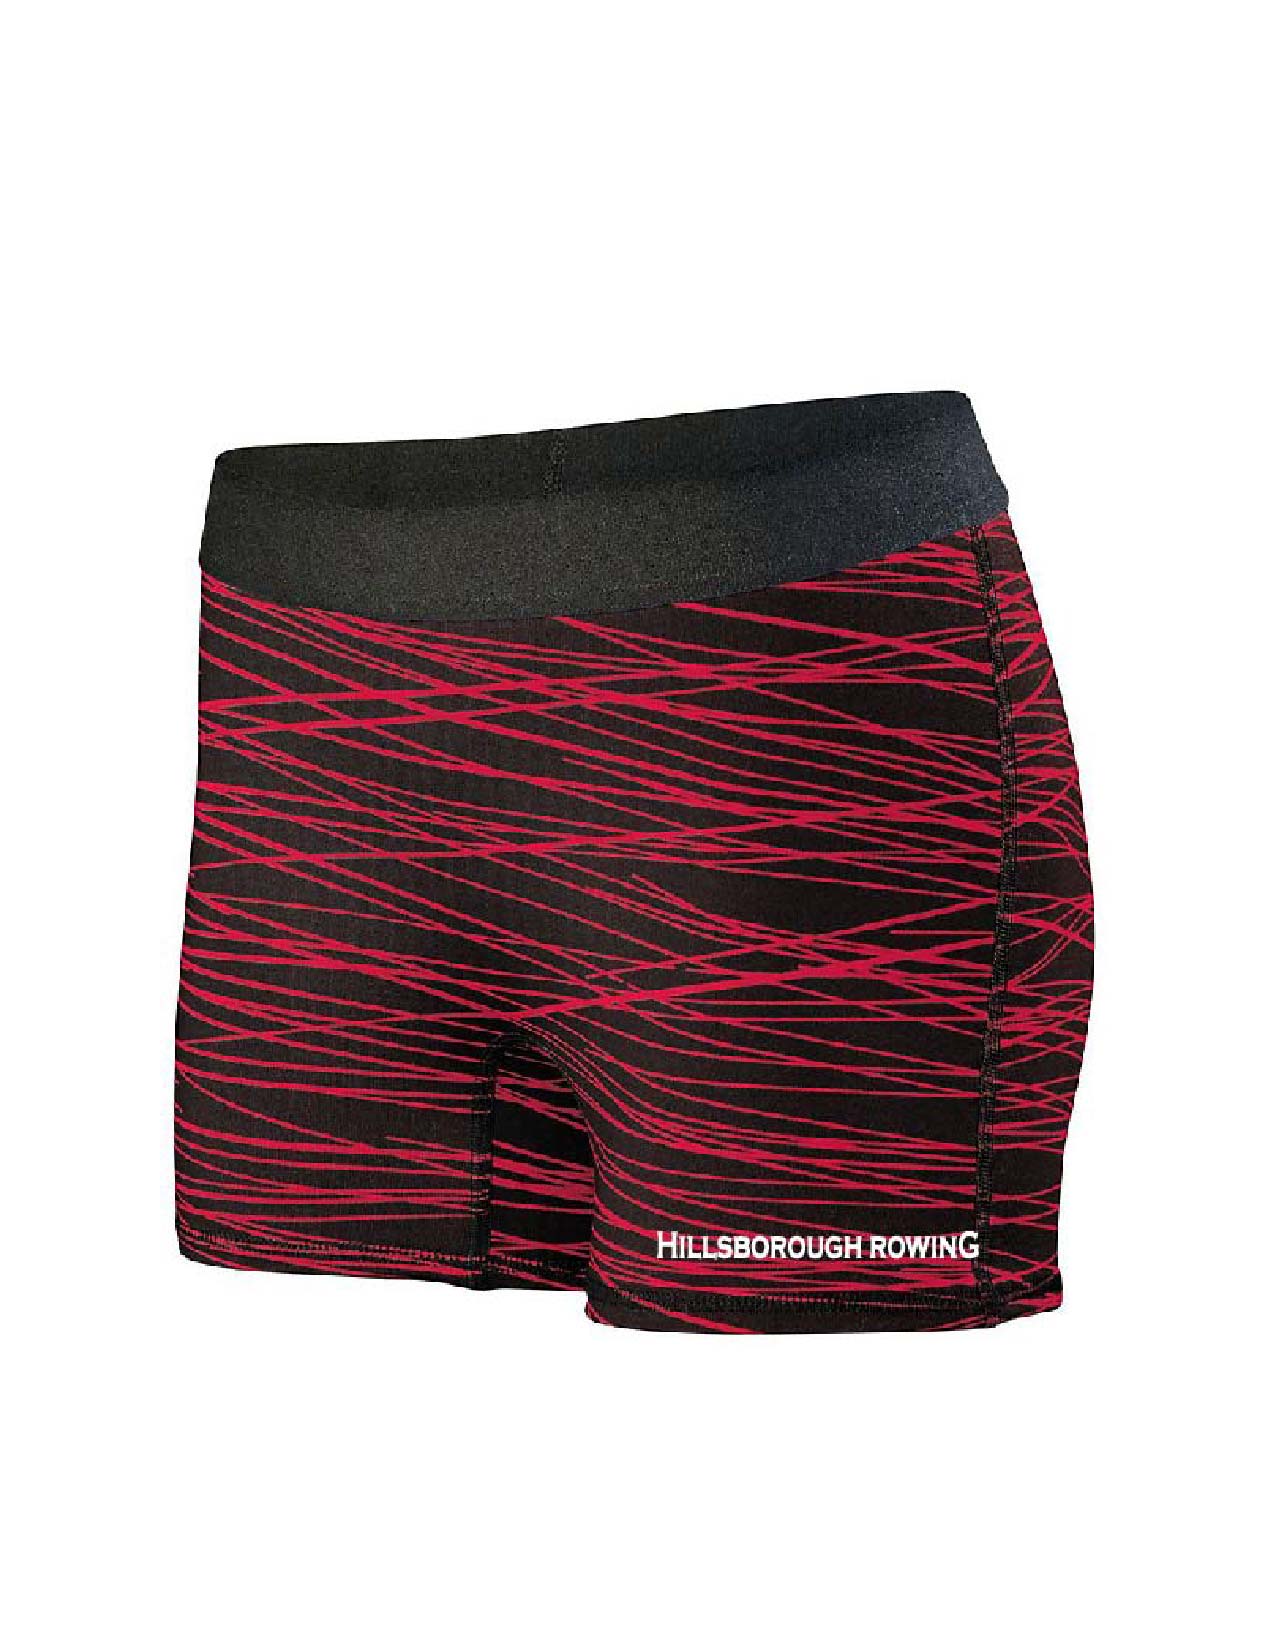 Z - HHS Rowing Ladies Spandex Shorts